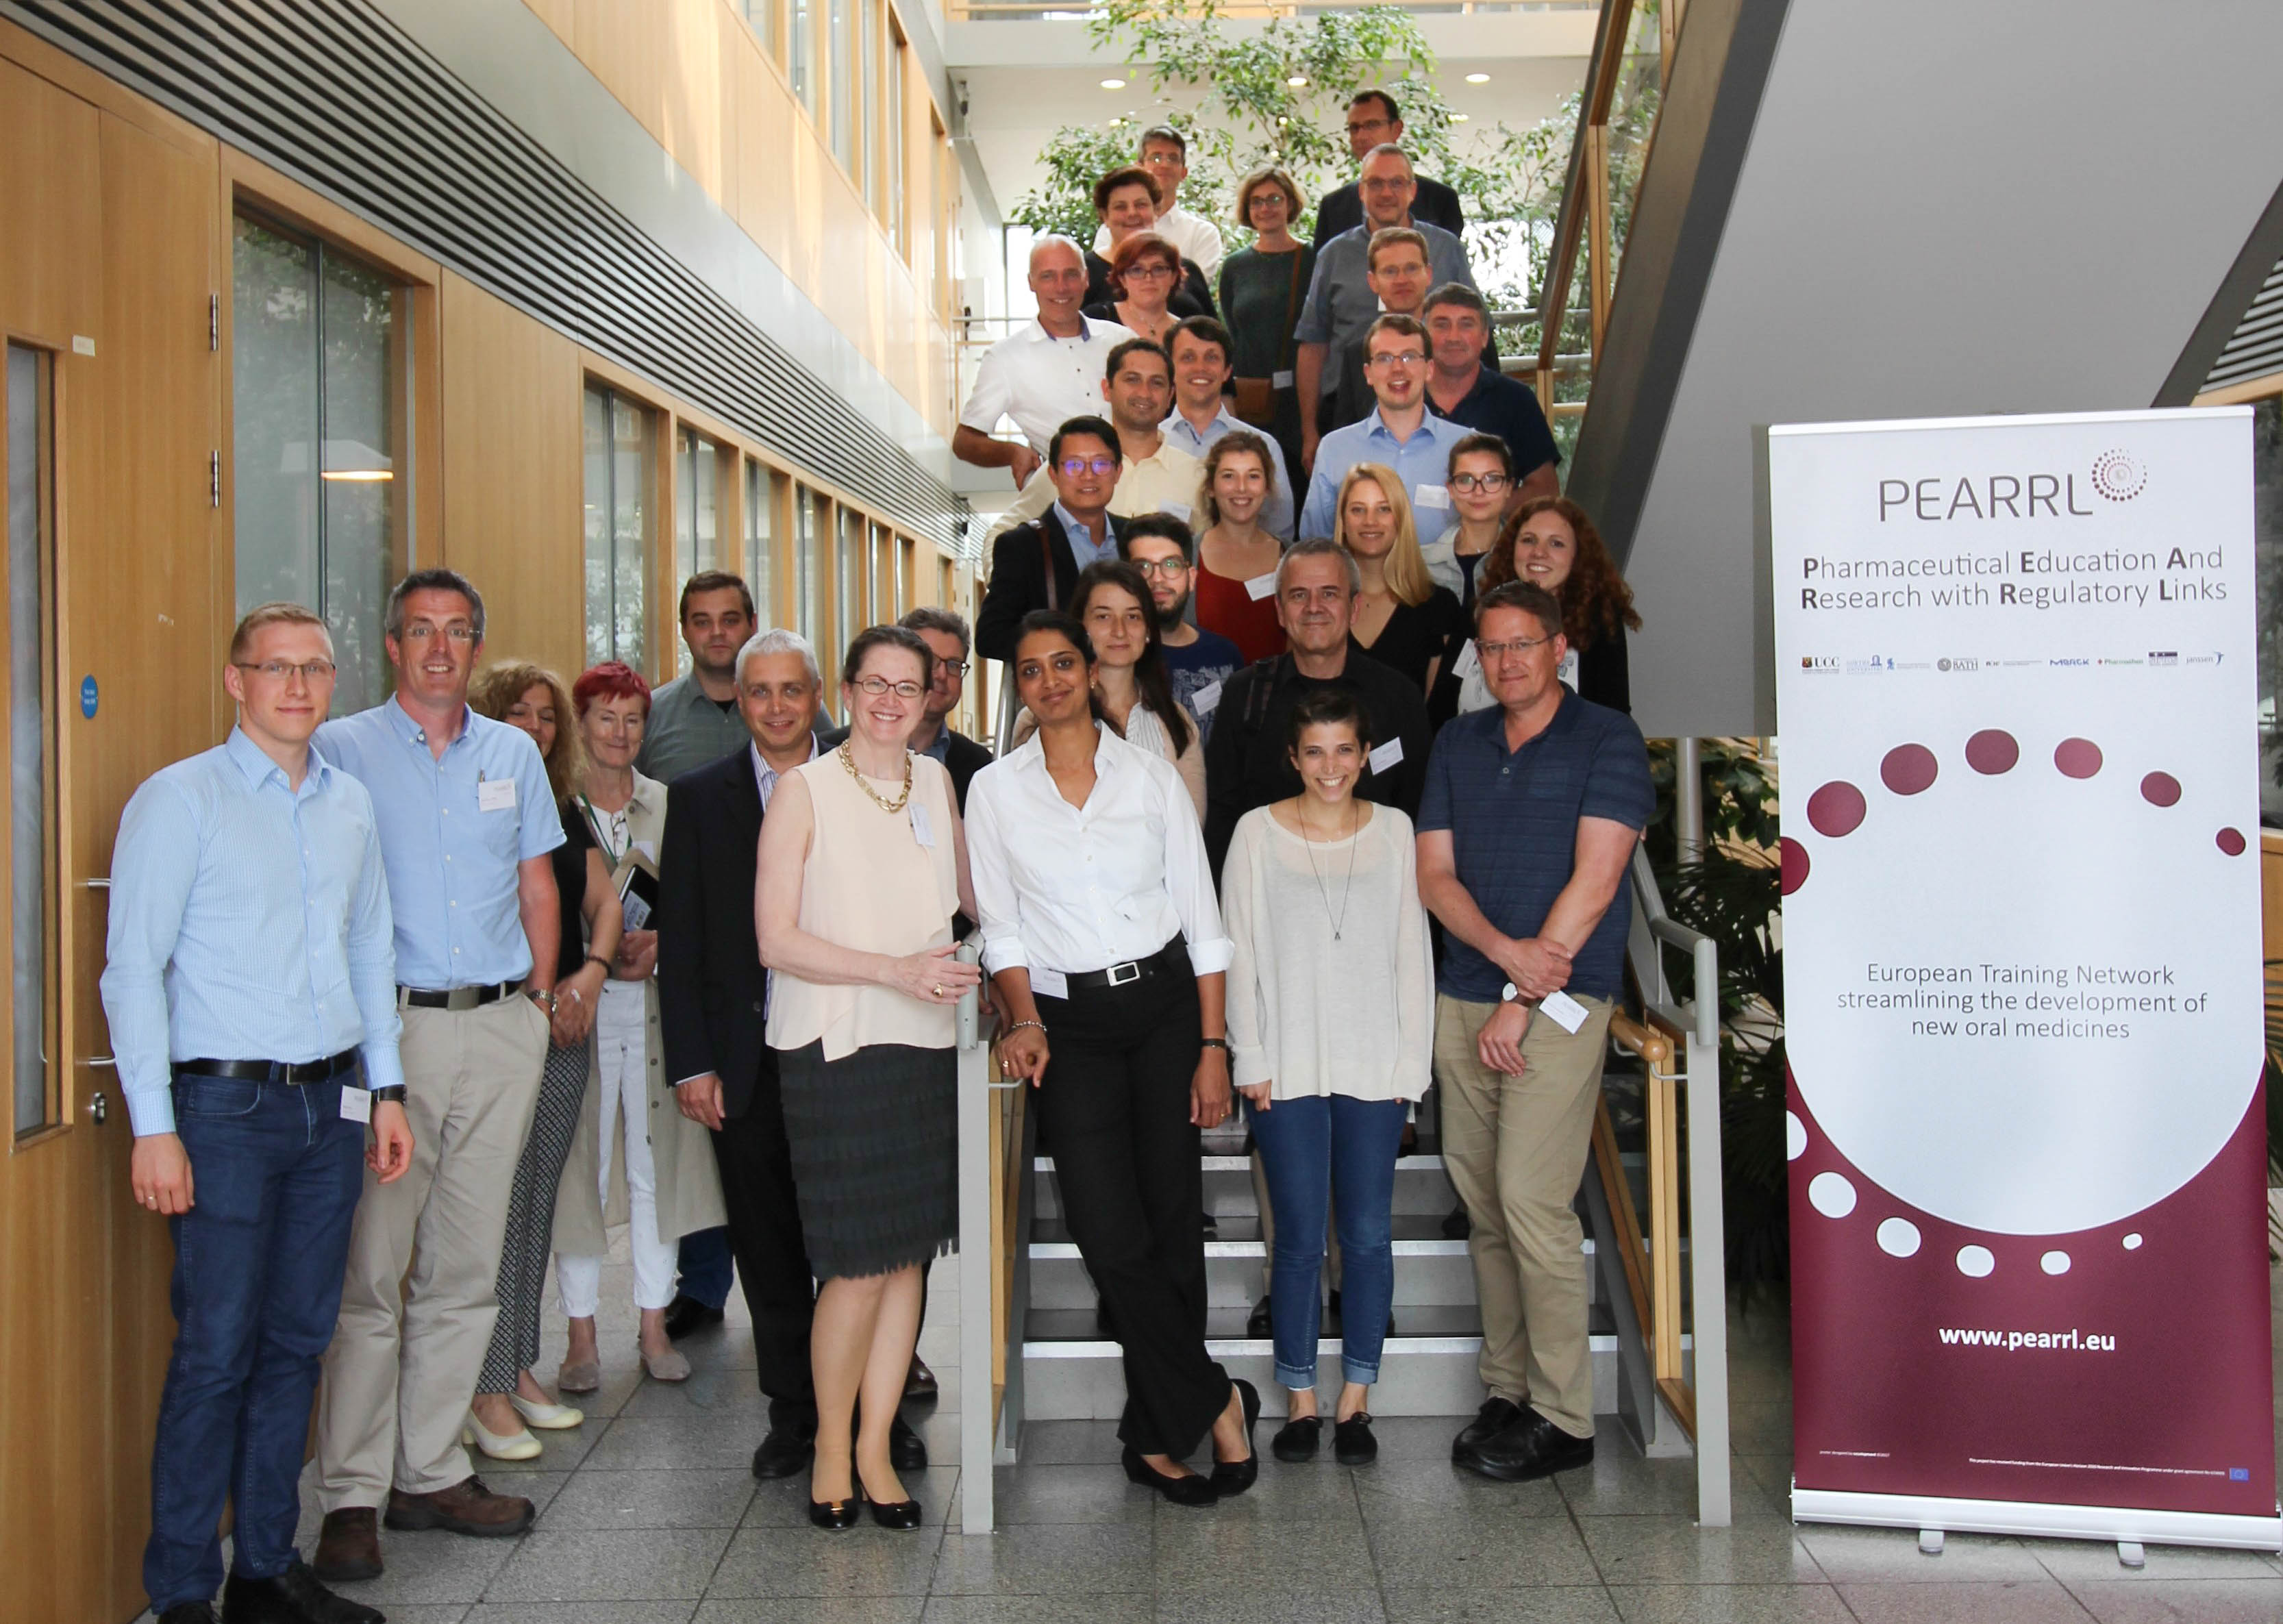 School of Pharmacy host first Annual Meeting of PEARRL EU training network 